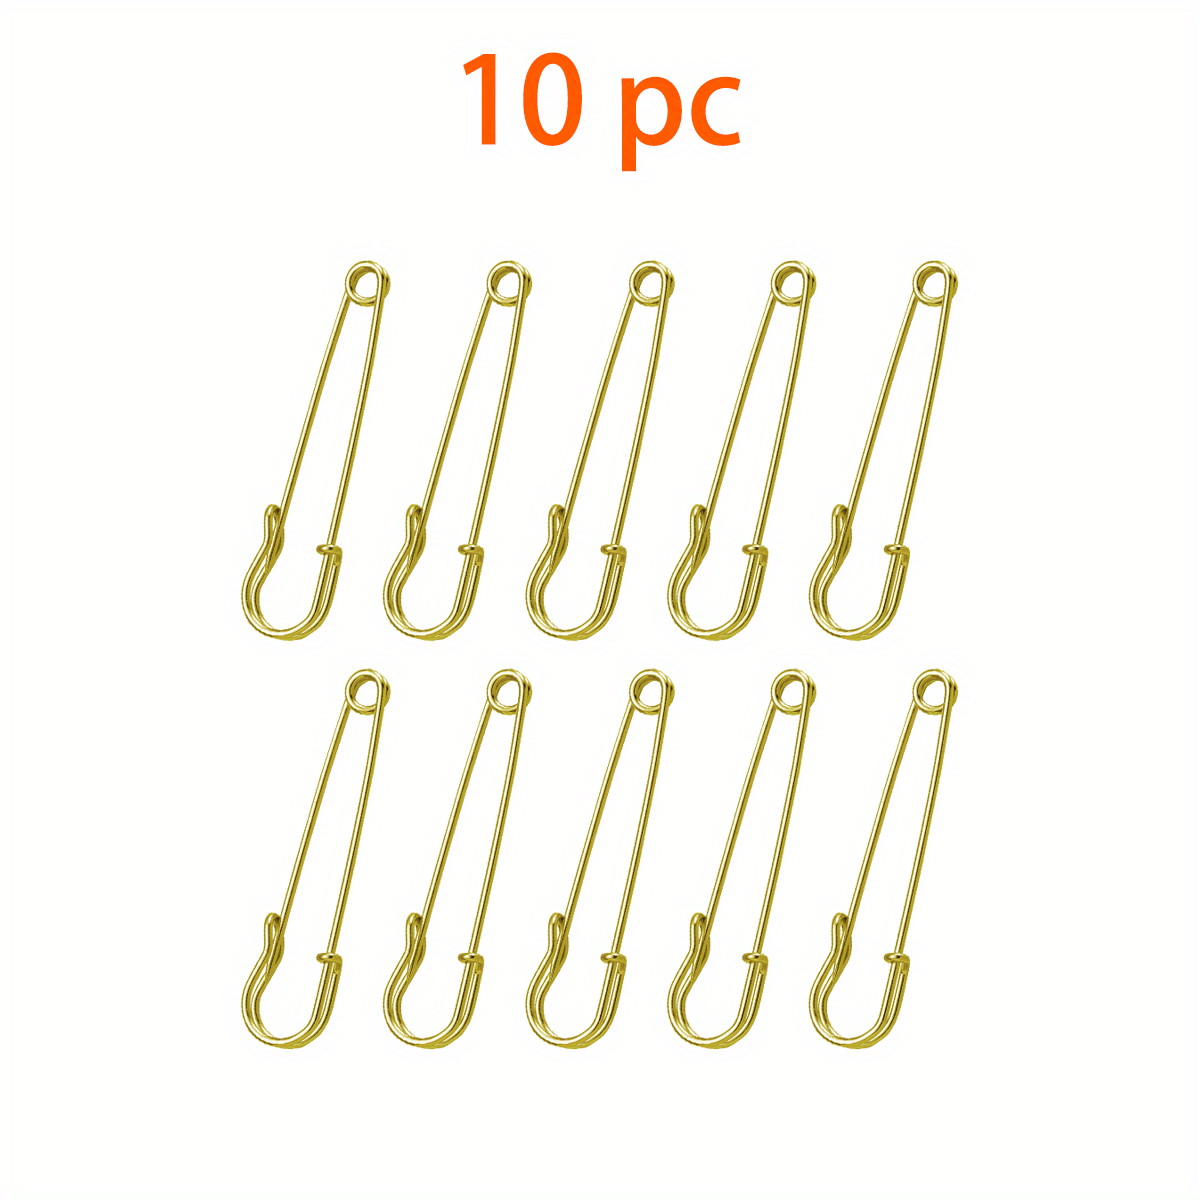  Safety Pins, 340-Pack Safety Pins Assorted, Large Safety Pins  Heavy Duty, 5 Different Sizes Safety Pin for Clothes Pins, Small Safety  Pins for Sewing, Jewelry Making, Arts and Crafts (Rose Gold)